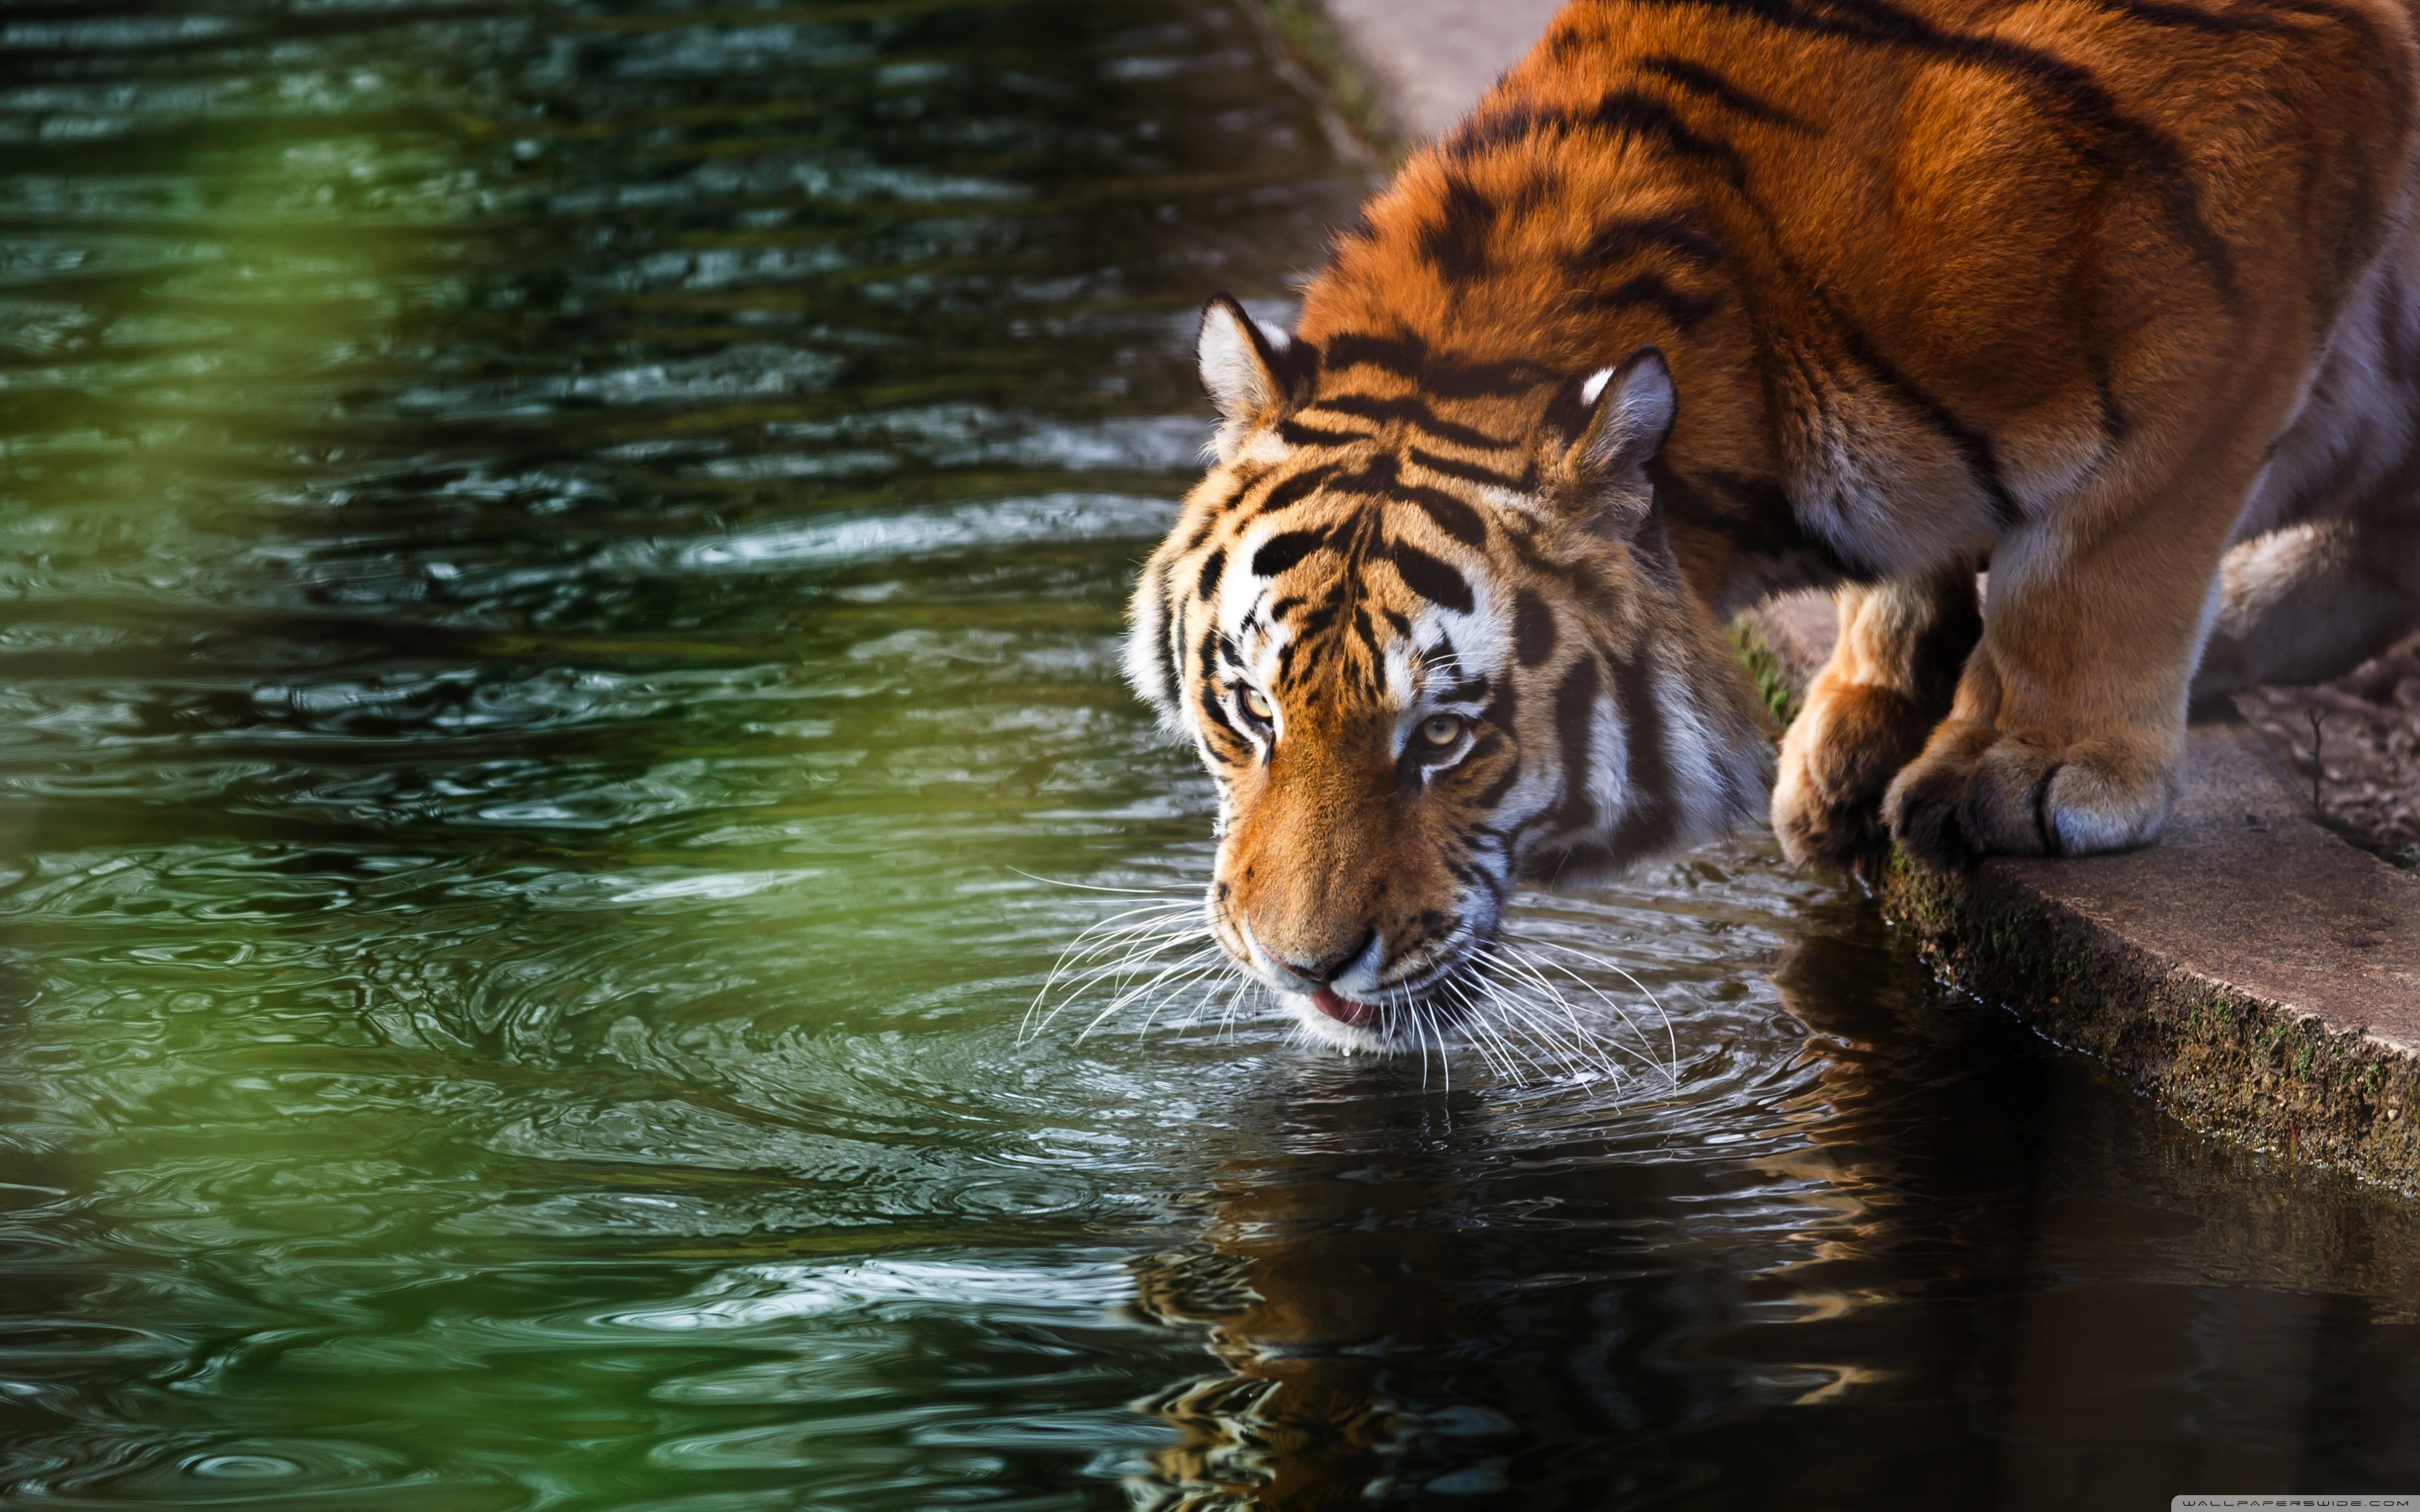 Tiger drinking water photo